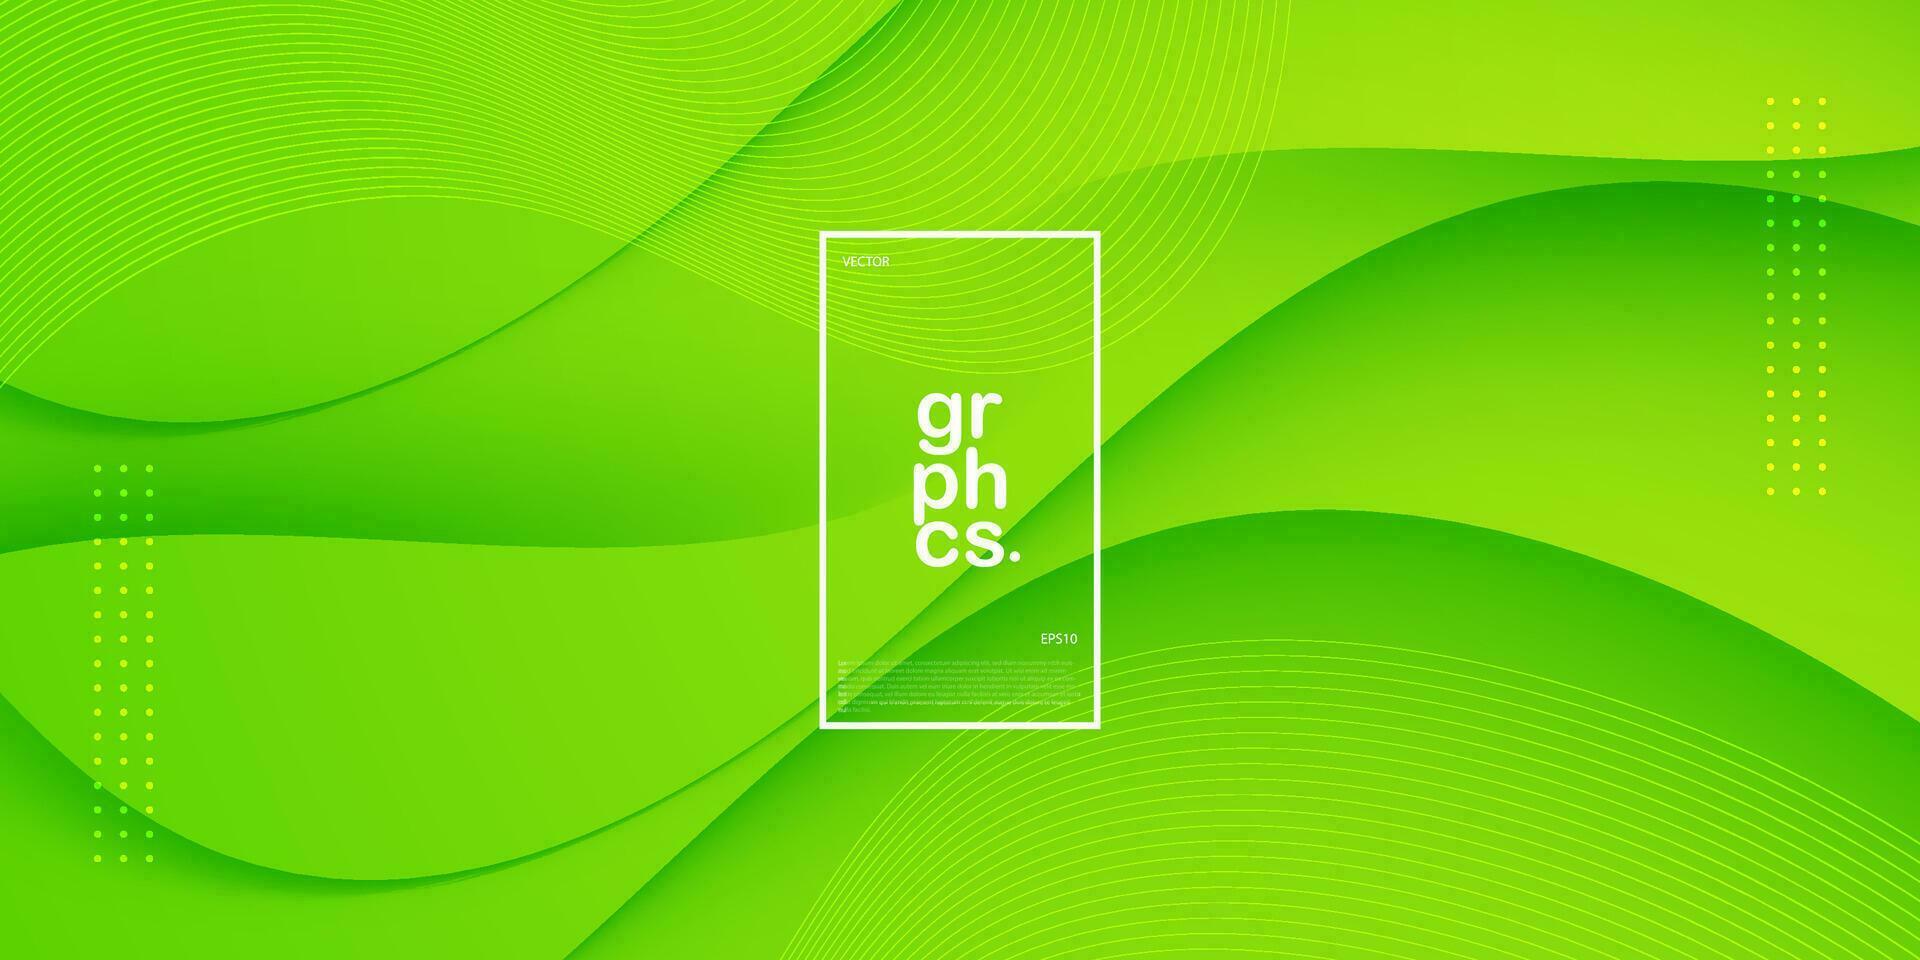 Green wave background with simple fluid shape and lines pattern. Colorful simple green design. Simple bright geometric shapes concept. Eps10 vector